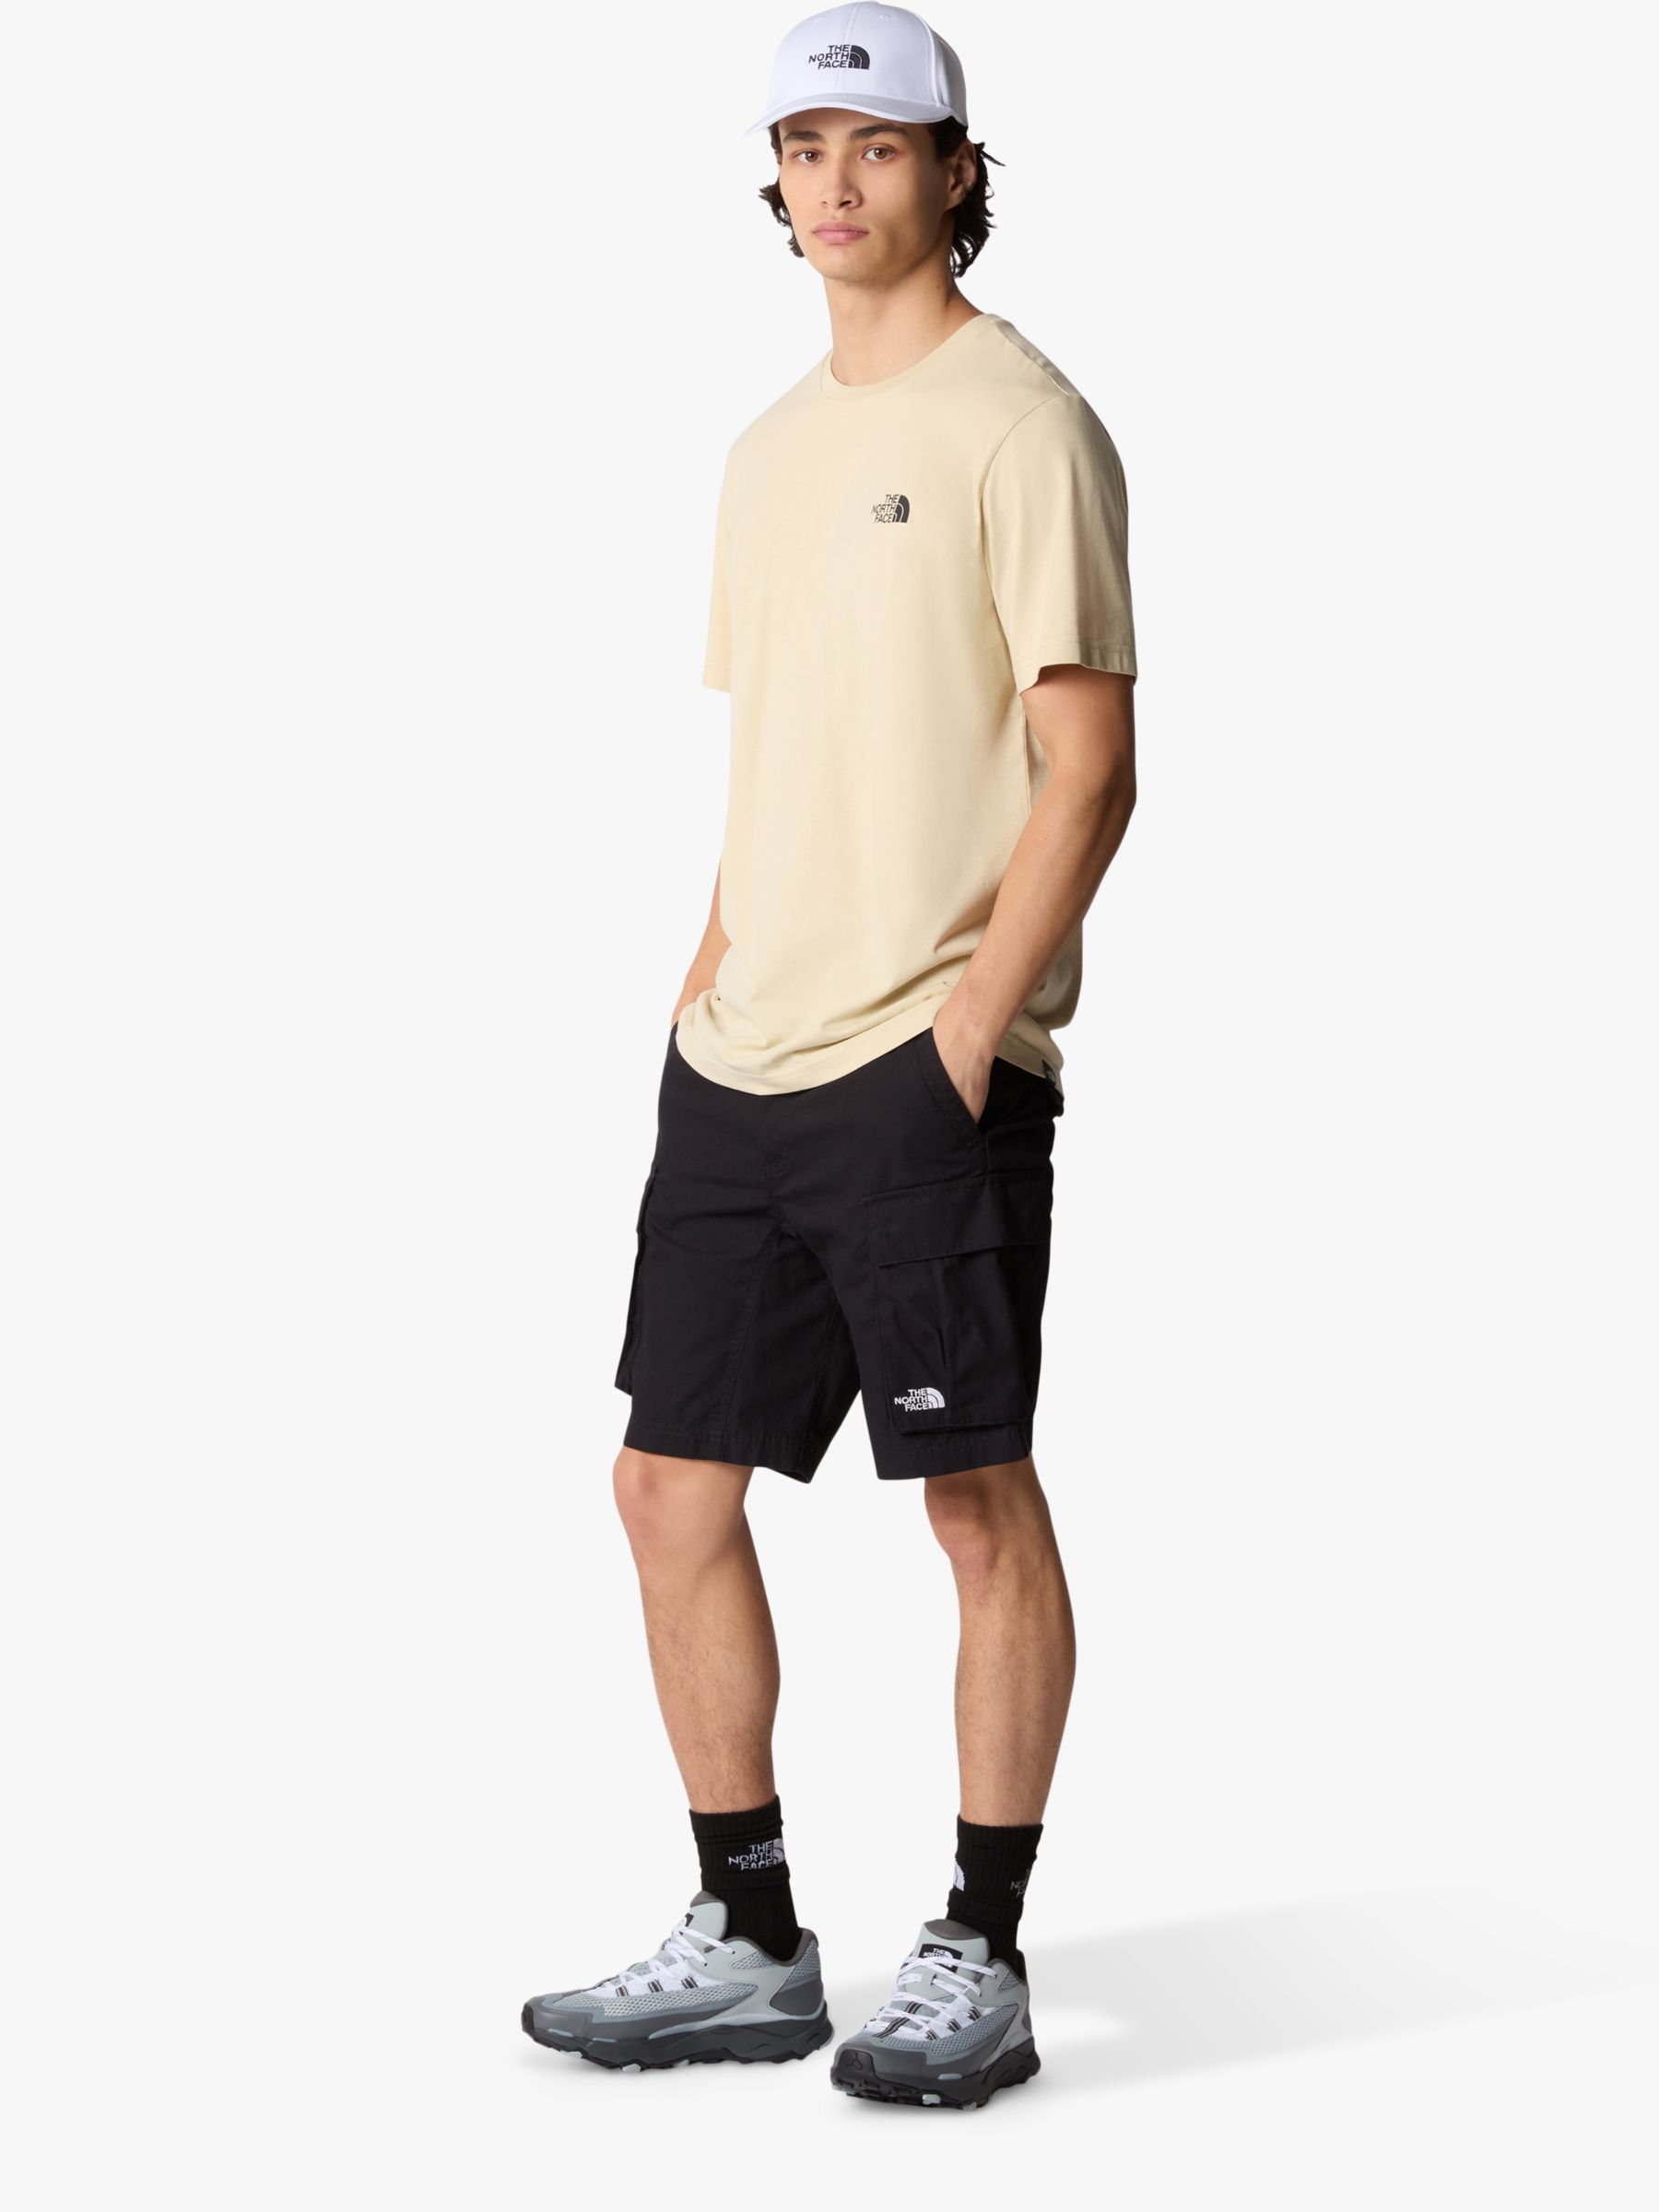 Buy The North Face Short Sleeve Dome T-Shirt Online at johnlewis.com